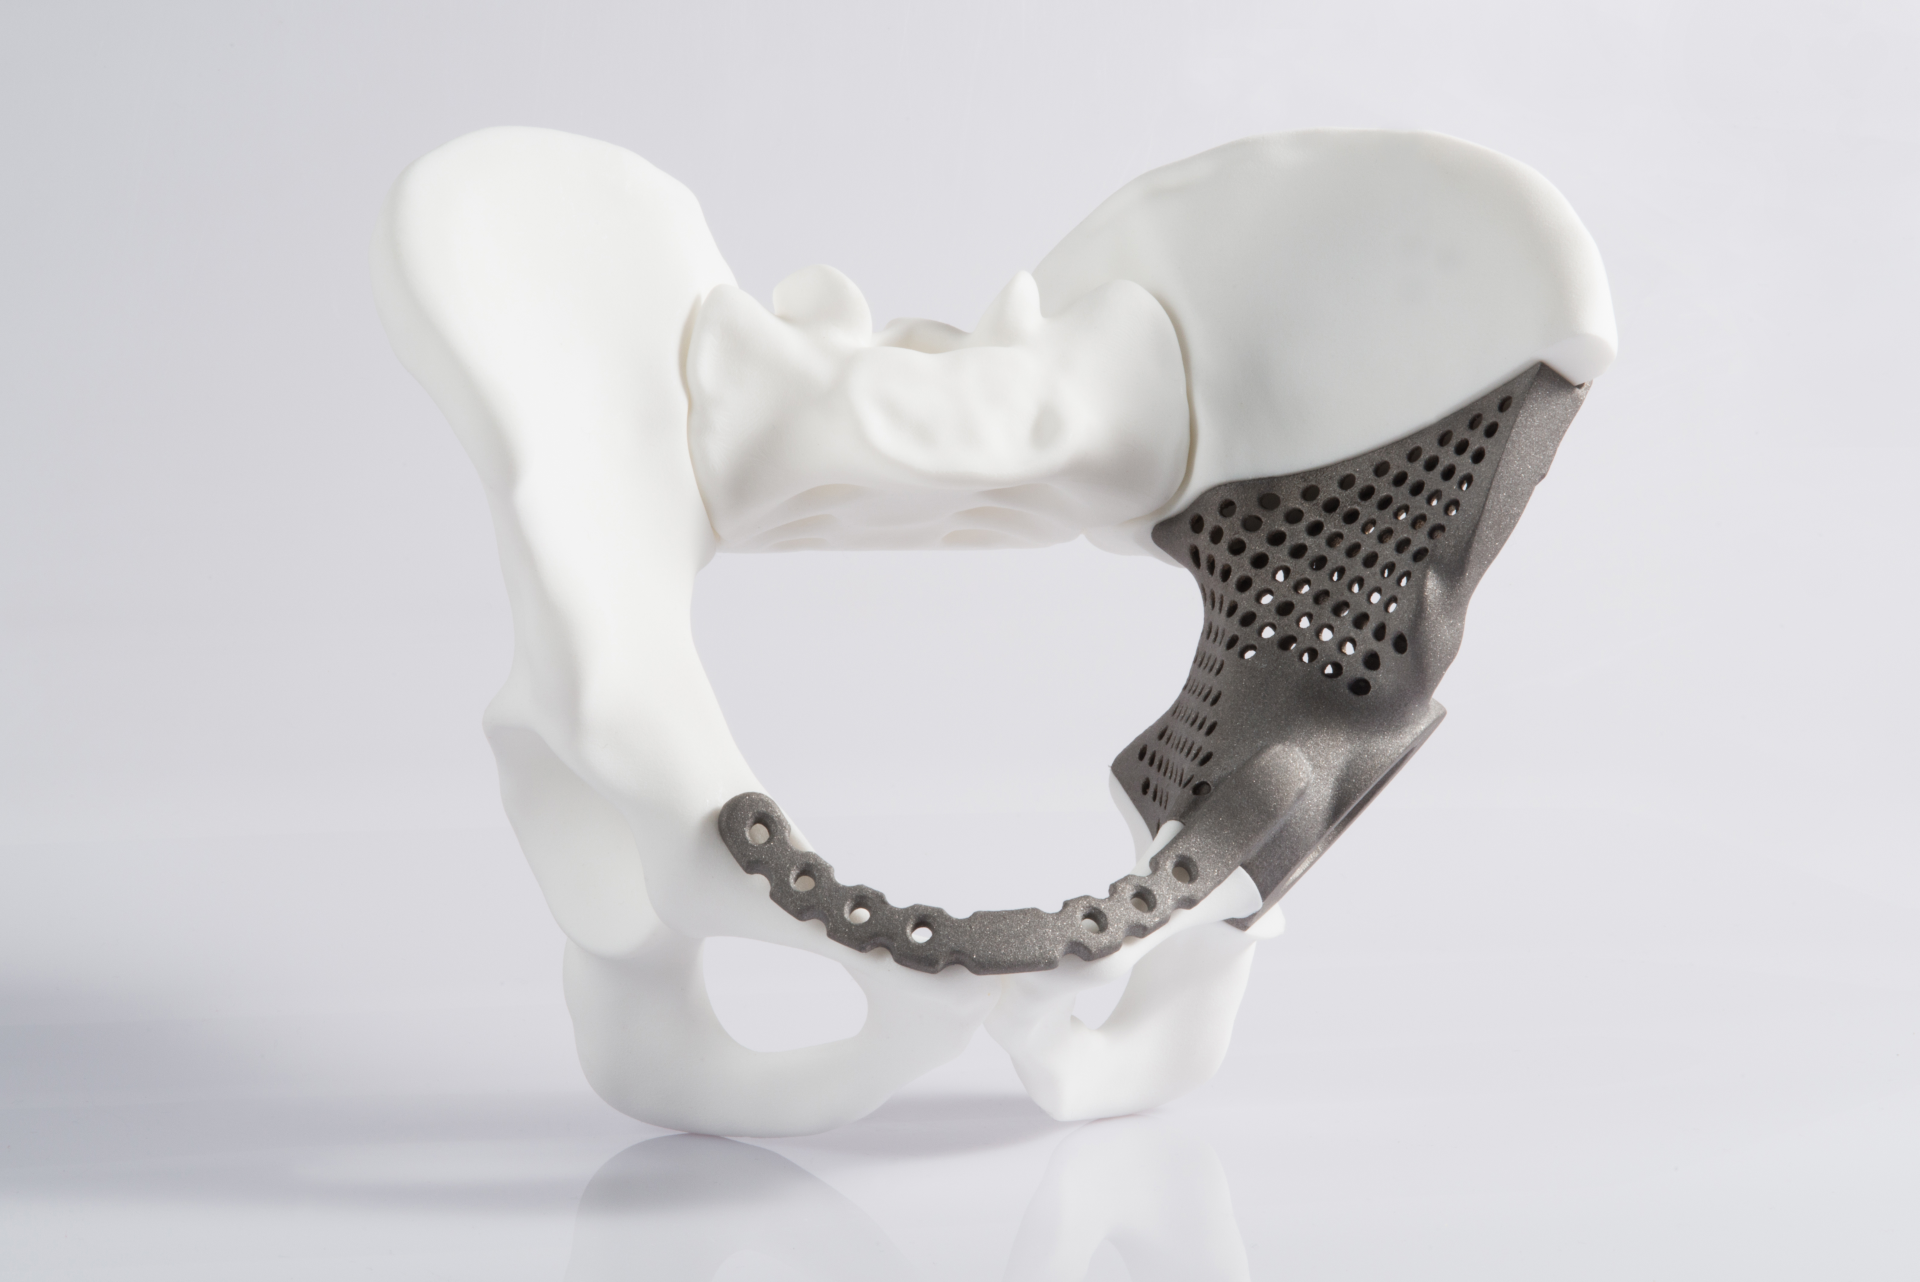 In the hip area, the precise shaping of the replacement bone is particularly important, so the implant had to be extremely correct.